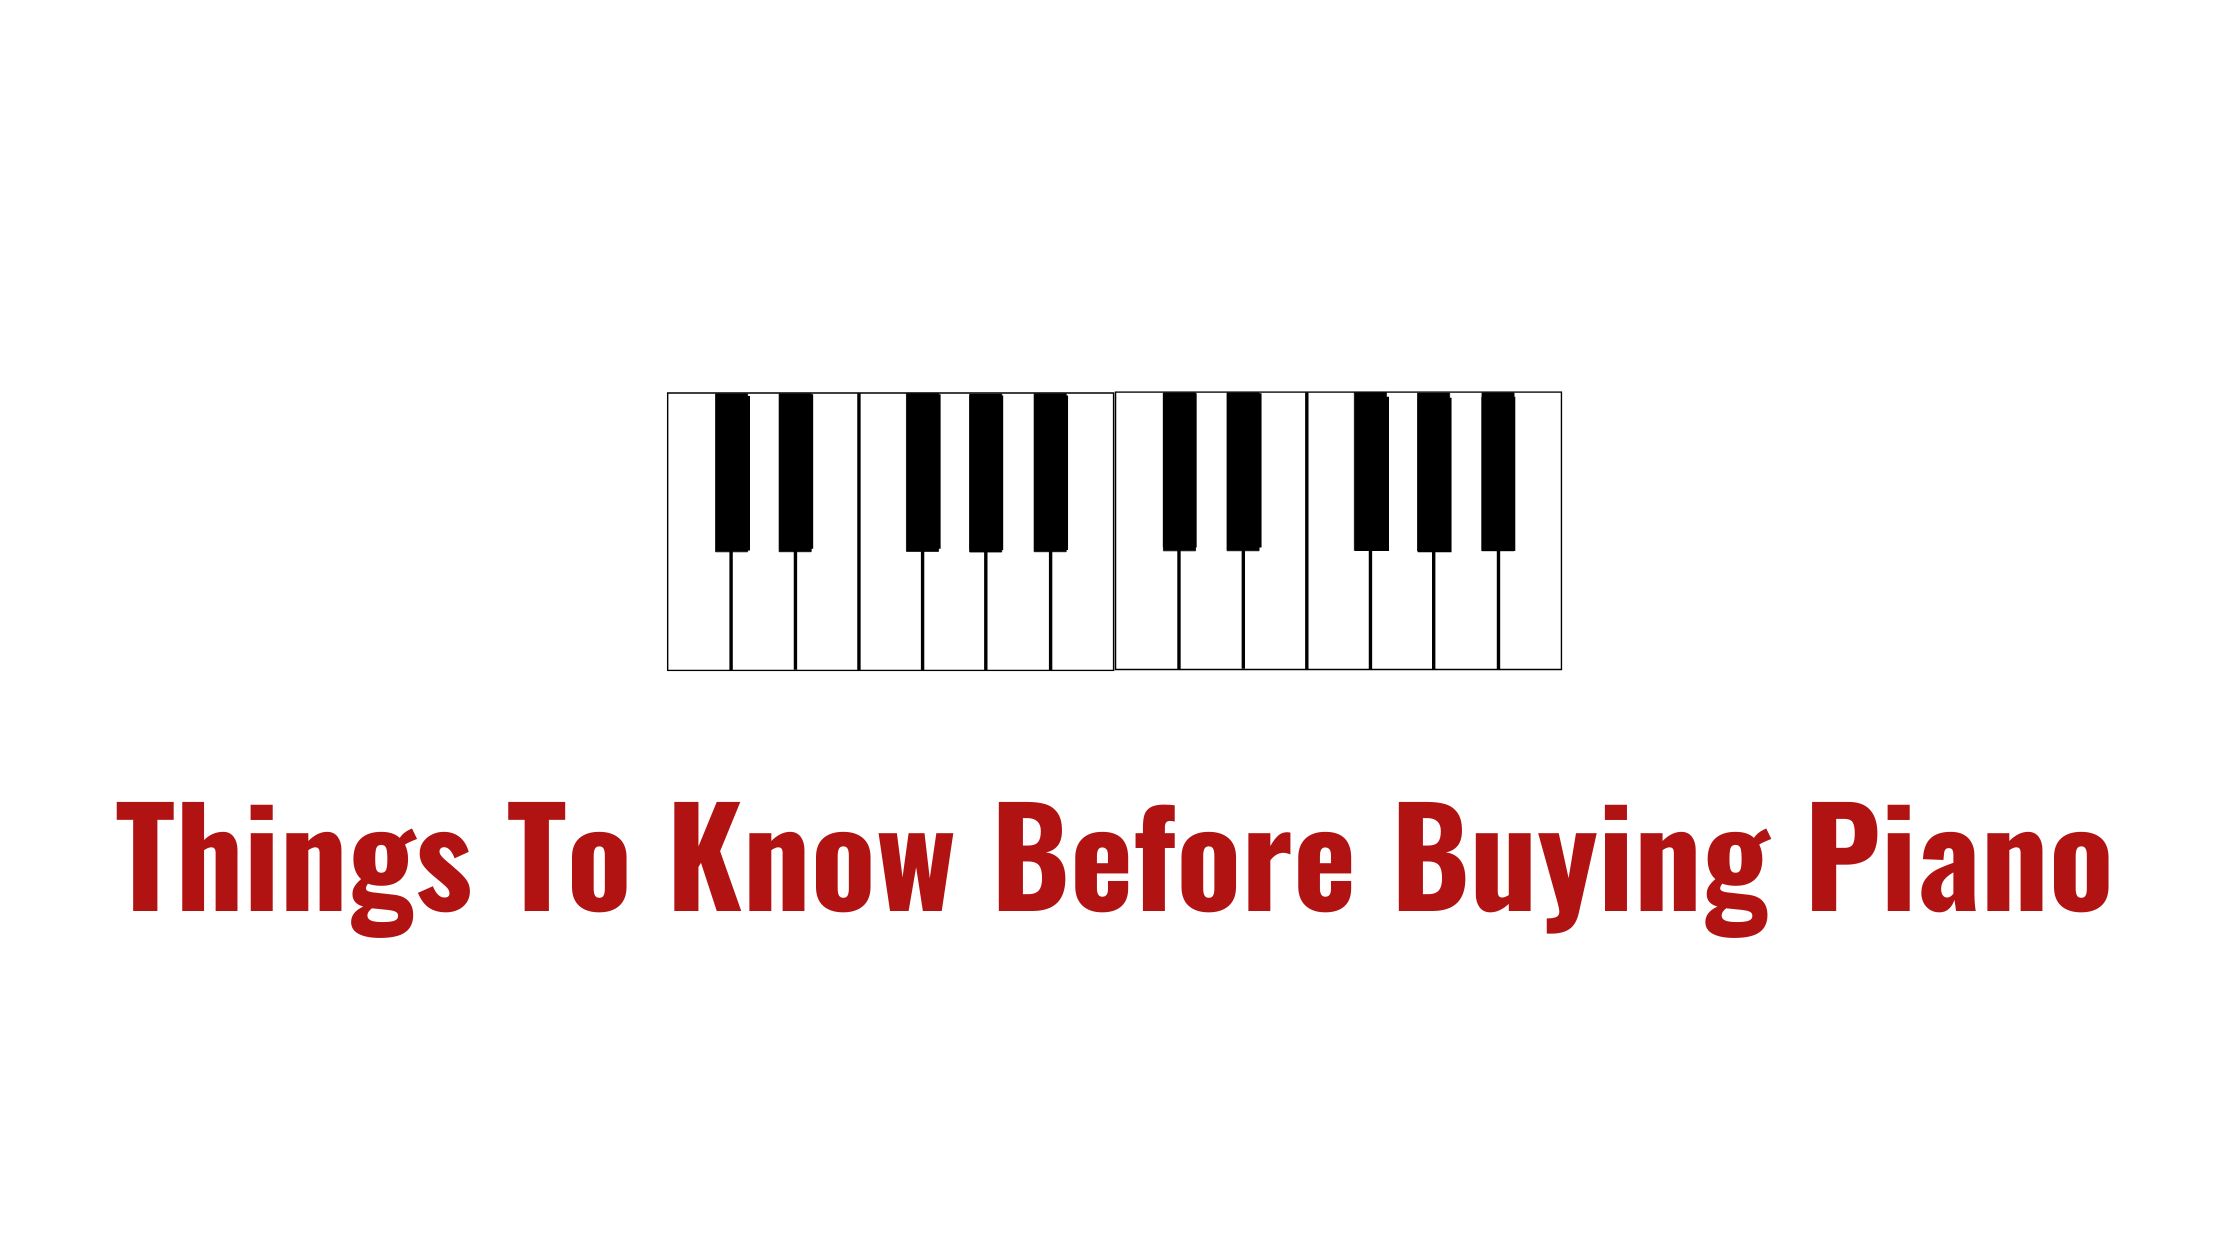 Things To Know Before Buying Piano